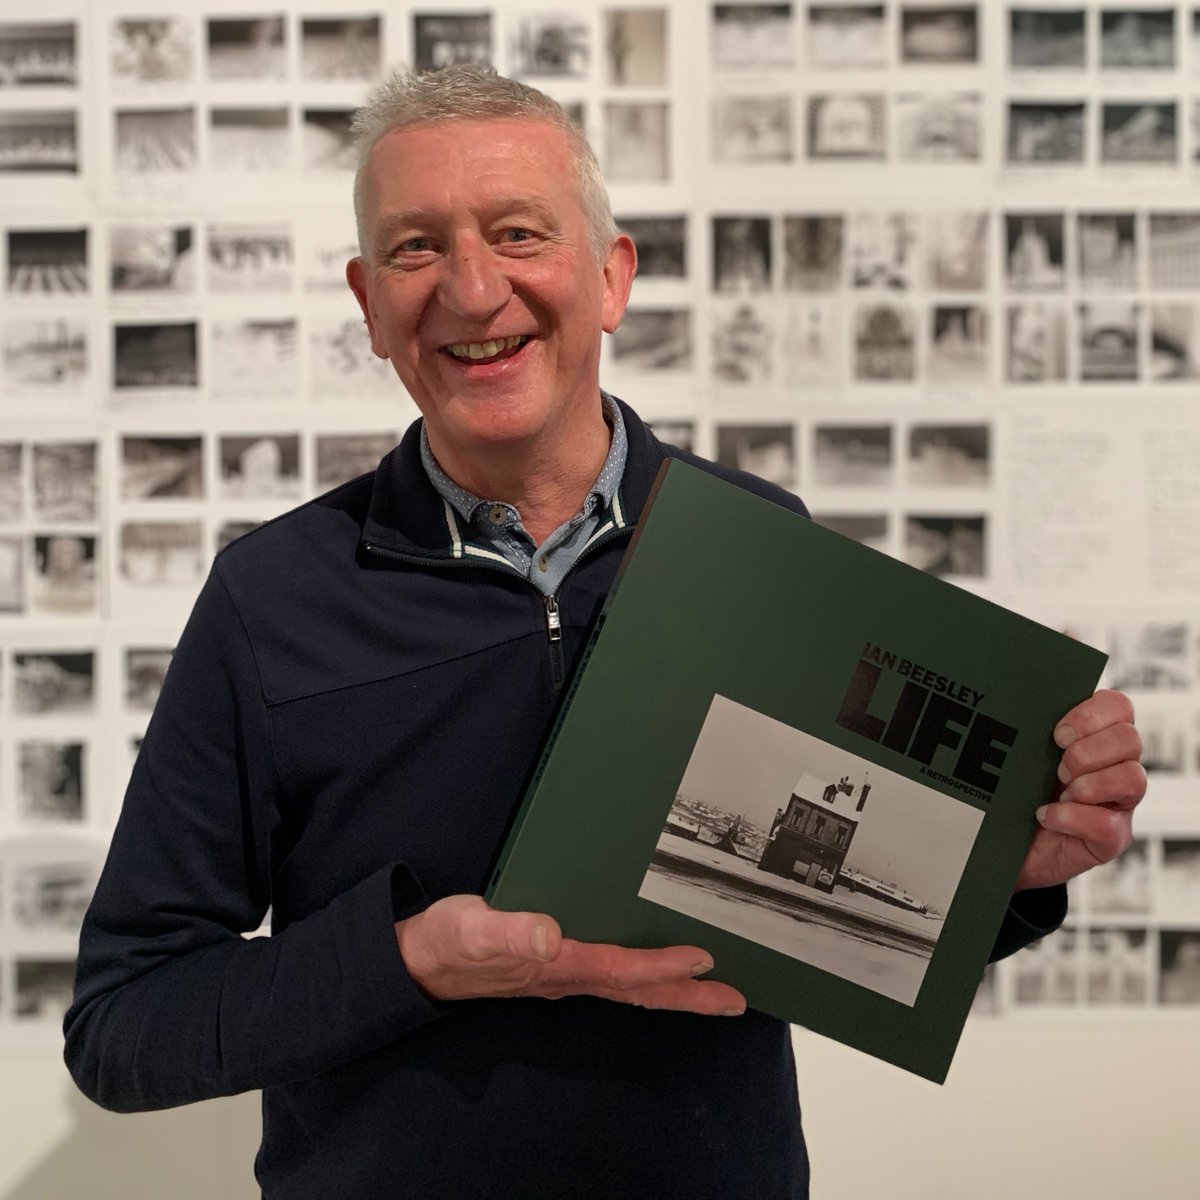 LIFE by Ian Beesley: the softback has just arrived! Here’s @IanBeesleyphoto with his copy - photographed in his new exhibition ‘Life Goes On’ which opens in Gallery 2 tomorrow. Signed copies of LIFE are available in the bookshop & online here saltsmillshop.co.uk/collections/bo…